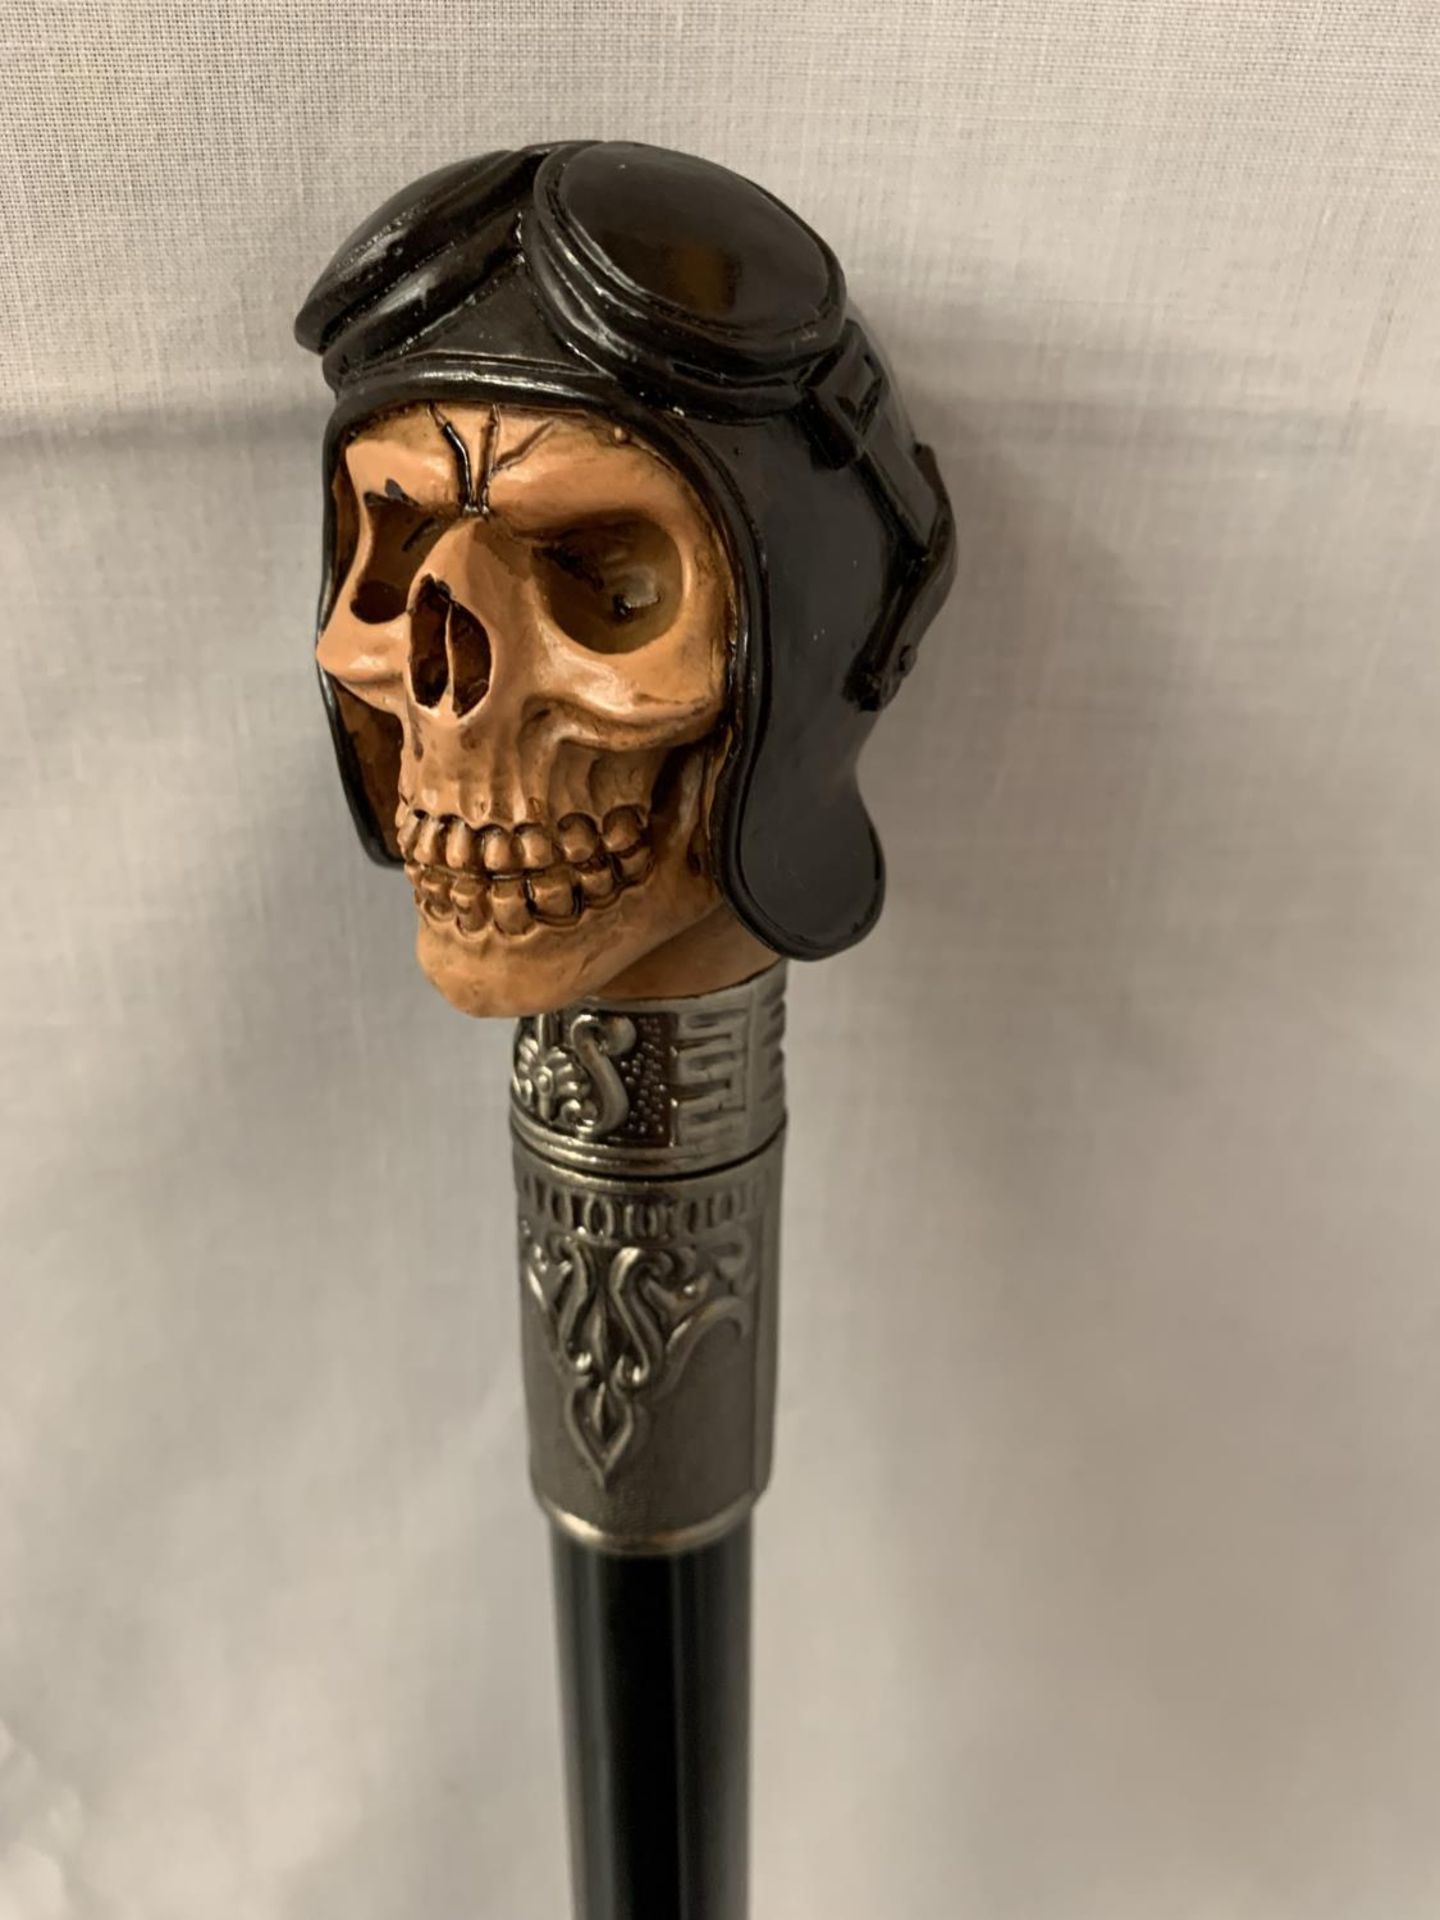 A WALKING STICK WITH A STEAMPUNK STYLE SKULL HEAD HANDLE - Image 3 of 3